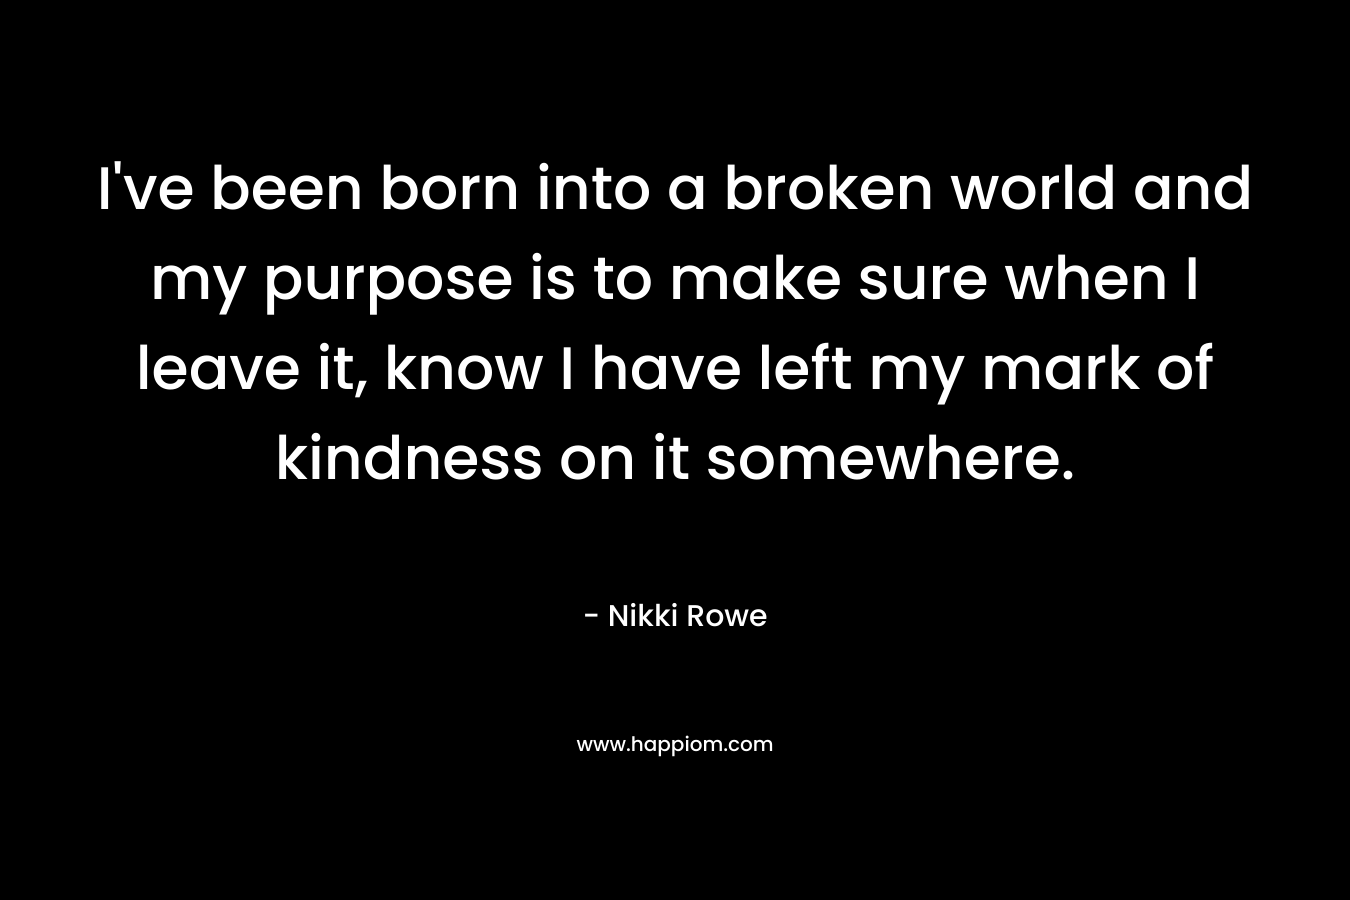 I've been born into a broken world and my purpose is to make sure when I leave it, know I have left my mark of kindness on it somewhere.